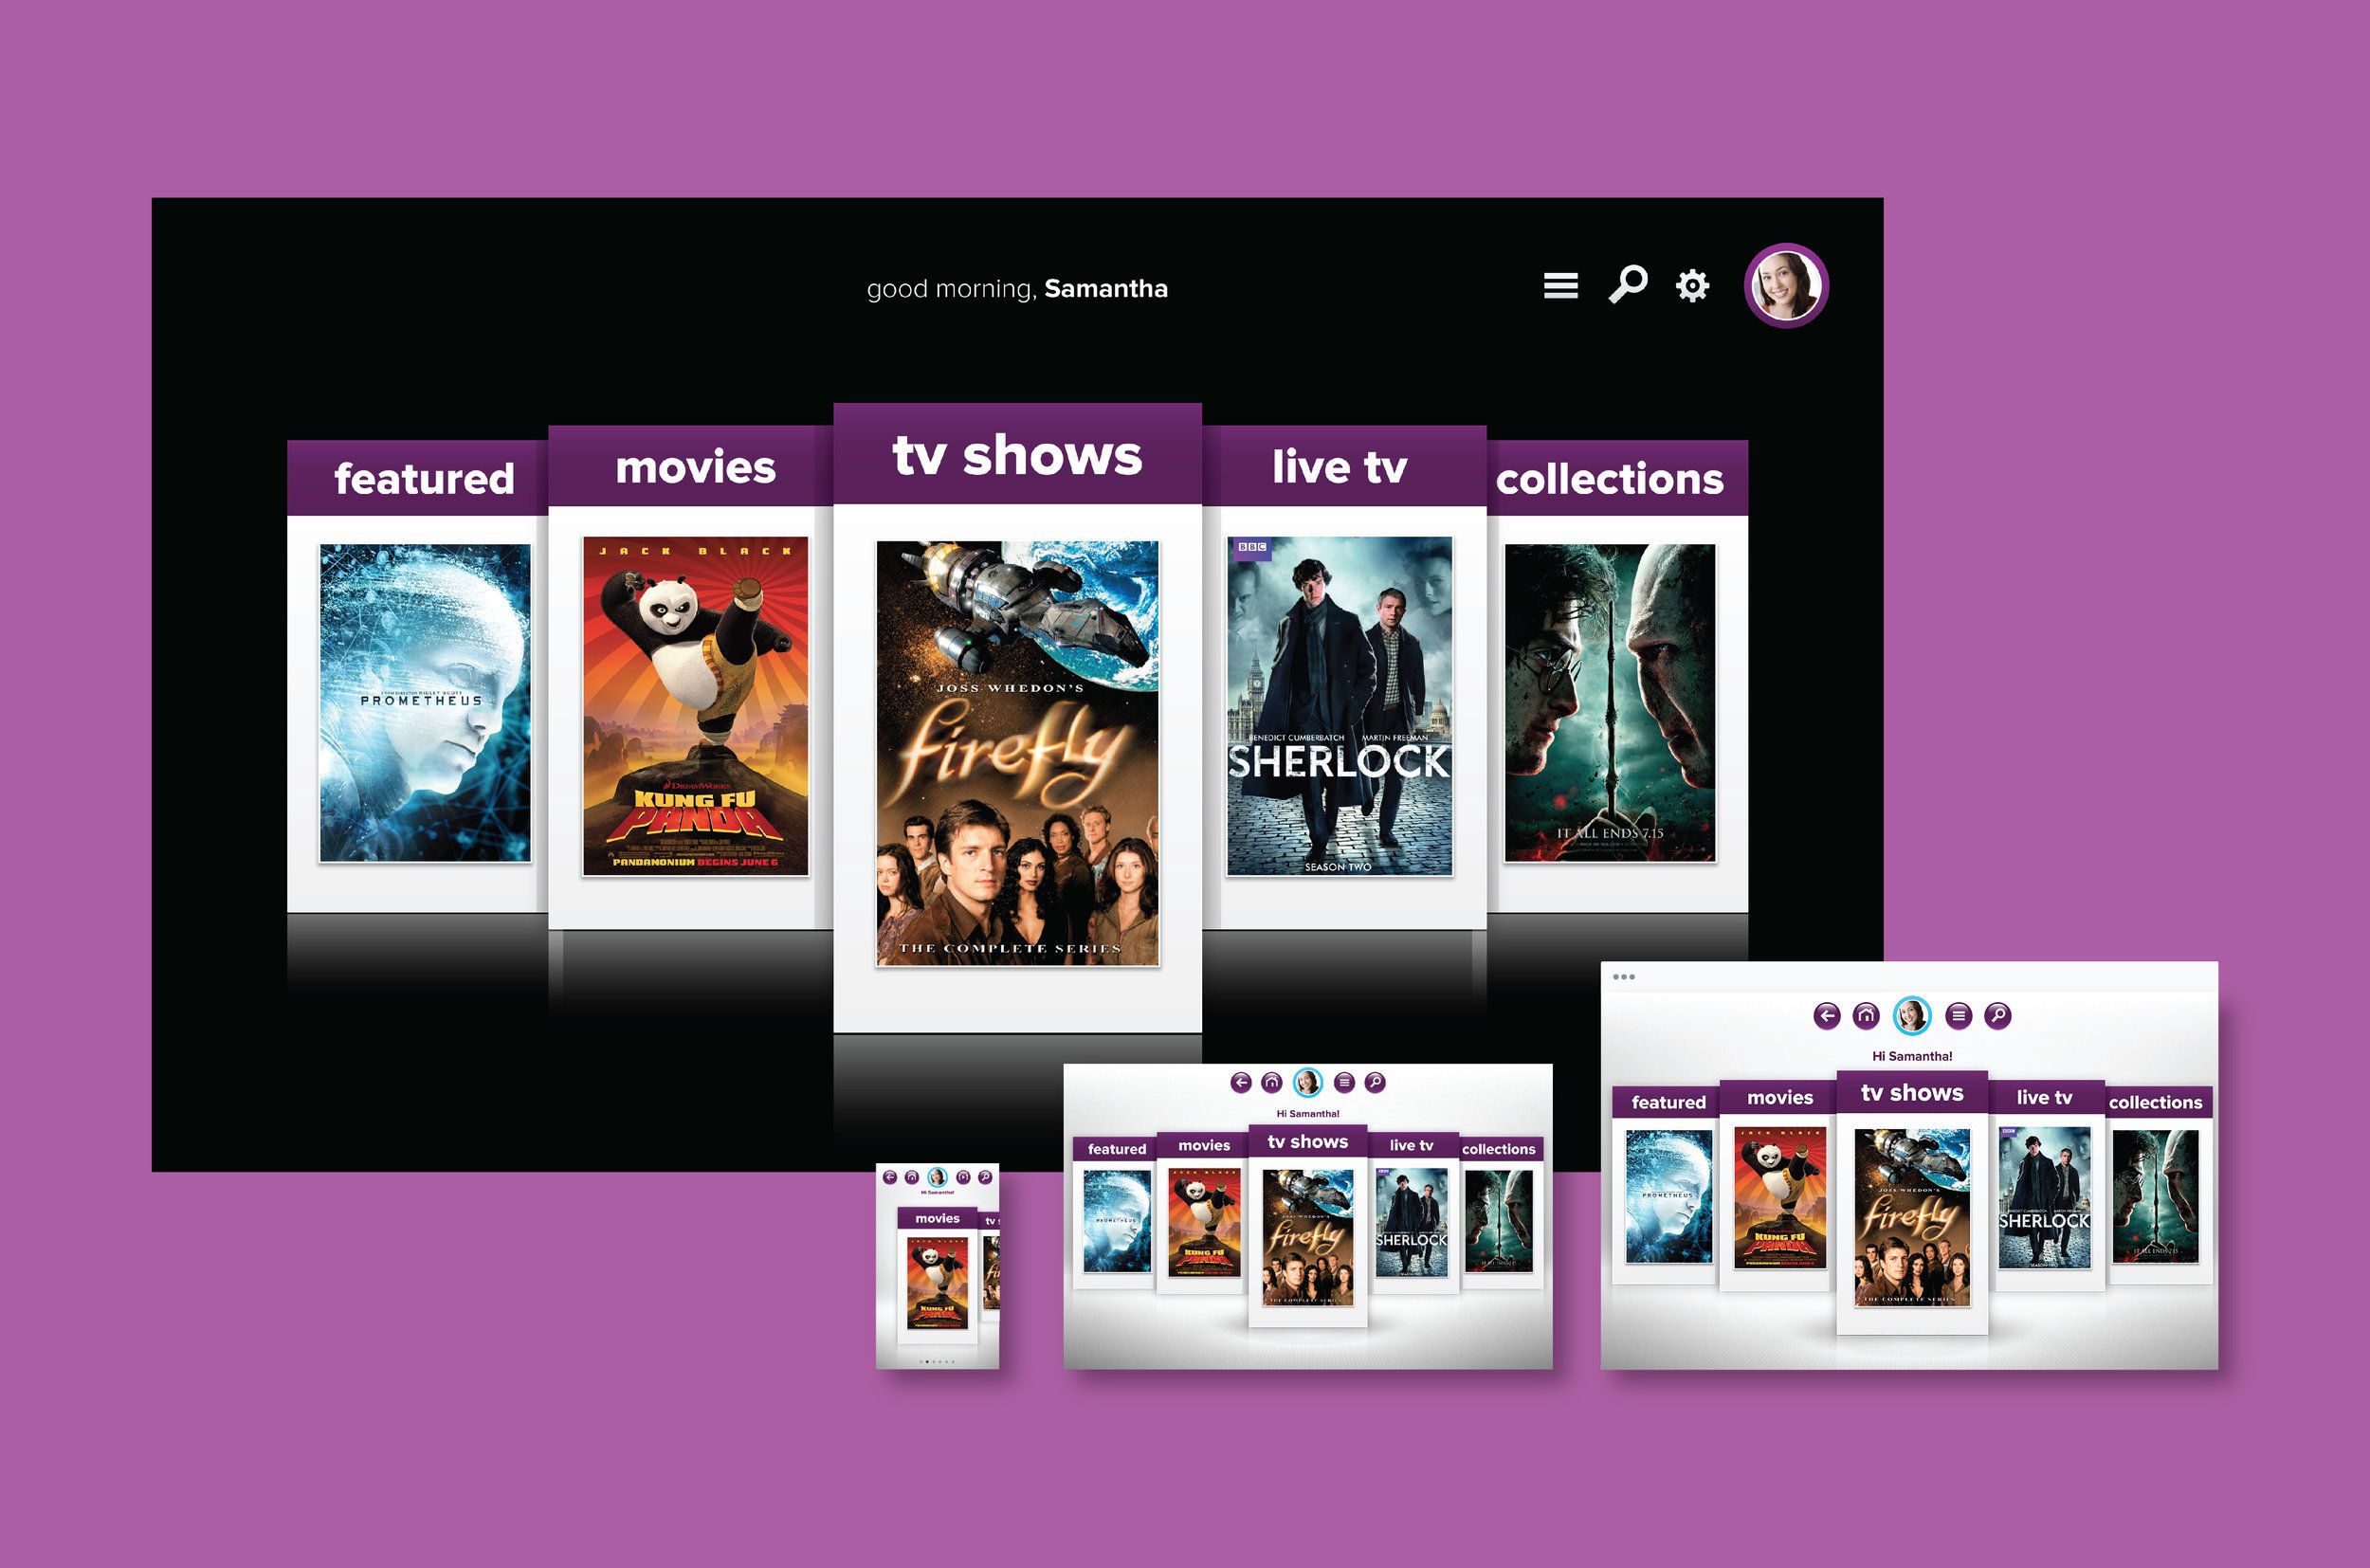 Several versions of a home page of the Dreamworks app showing various categories of media, movies, and tv shows